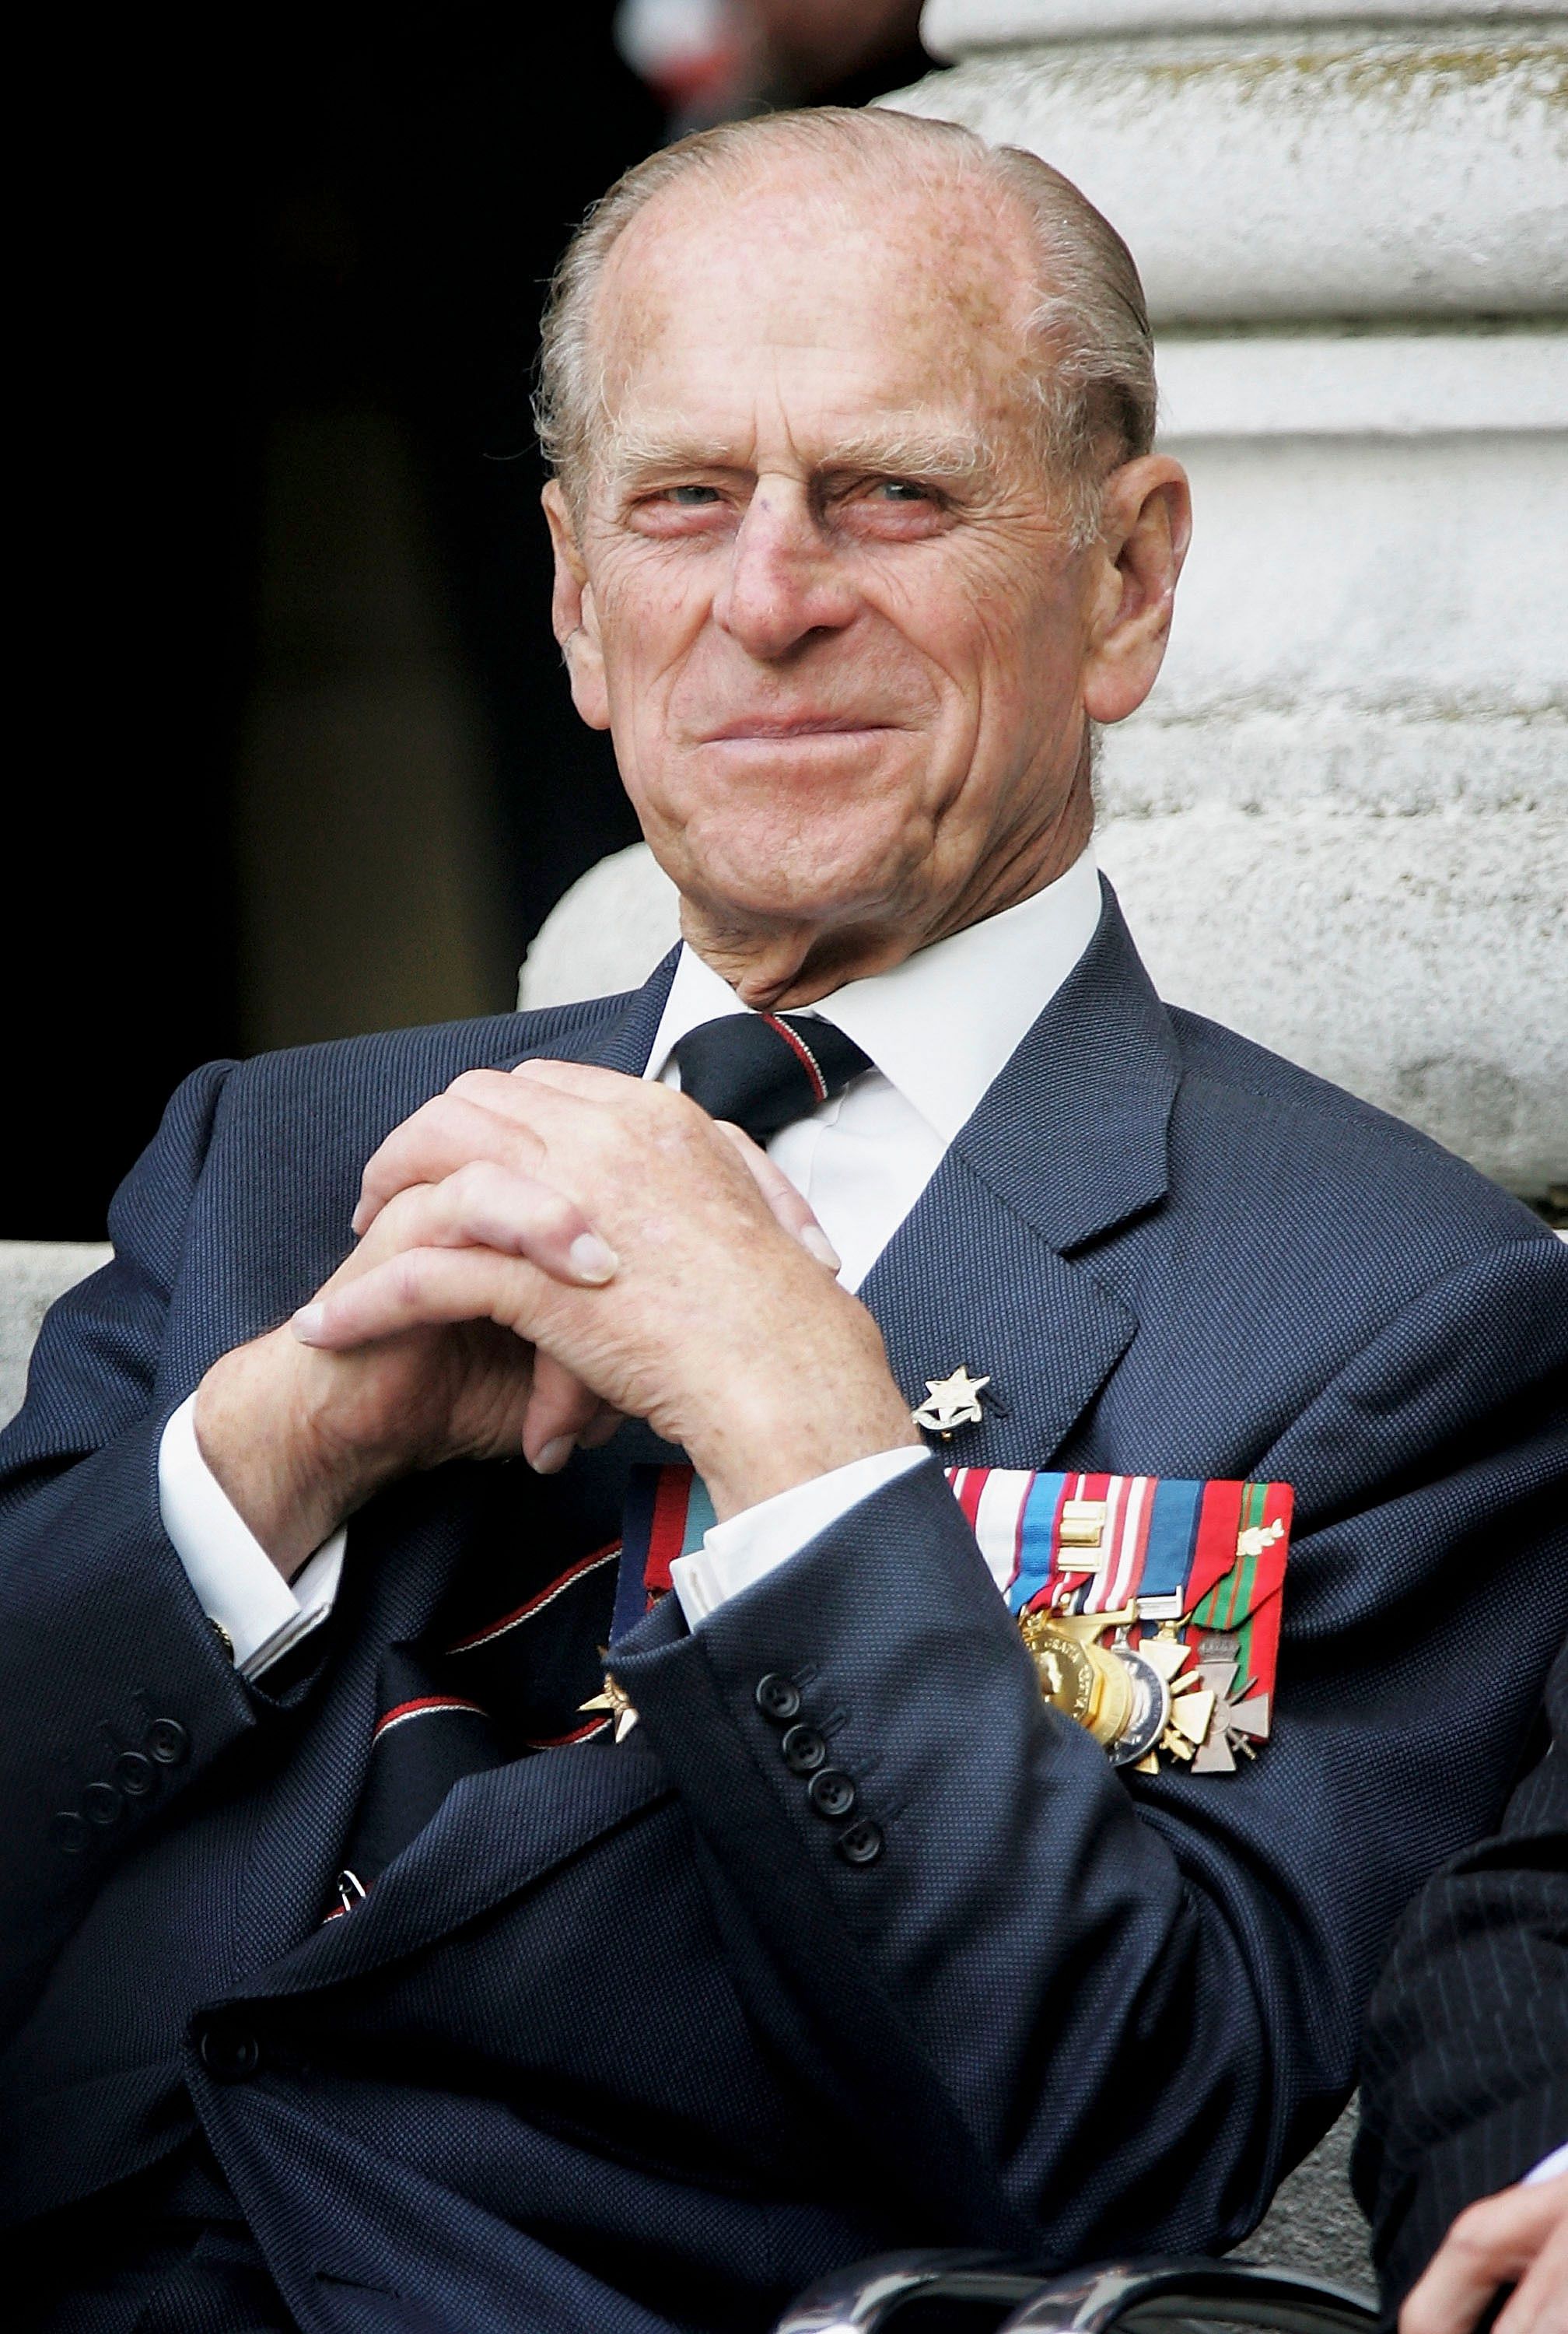 The Duke of Edinburgh pictured at the Imperial War Museum on August 15, 2005 in London, England.&nbsp;